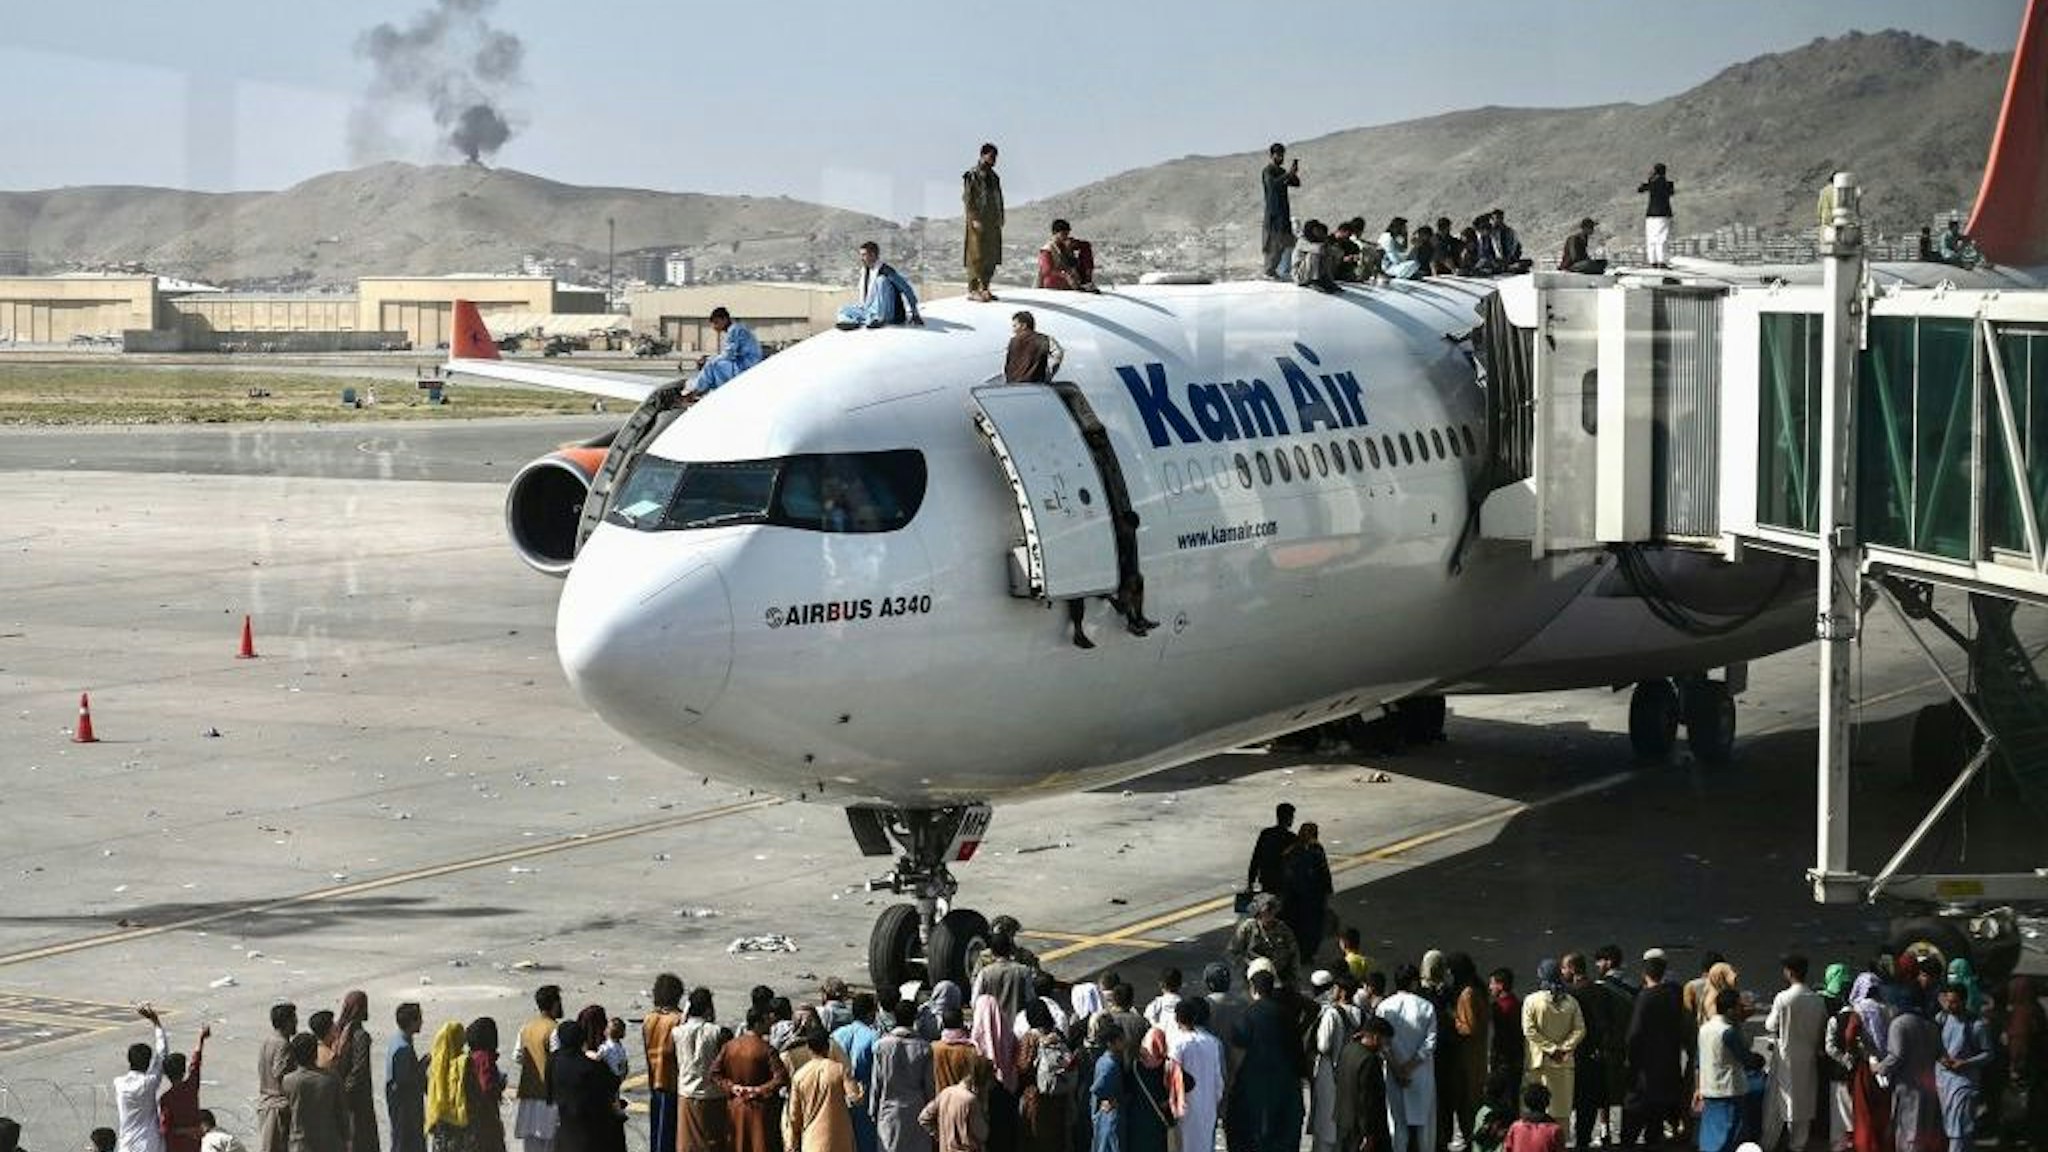 TOPSHOT - Afghan people climb atop a plane as they wait at the Kabul airport in Kabul on August 16, 2021, after a stunningly swift end to Afghanistan's 20-year war, as thousands of people mobbed the city's airport trying to flee the group's feared hardline brand of Islamist rule. (Photo by Wakil Kohsar / AFP) (Photo by WAKIL KOHSAR/AFP via Getty Images)